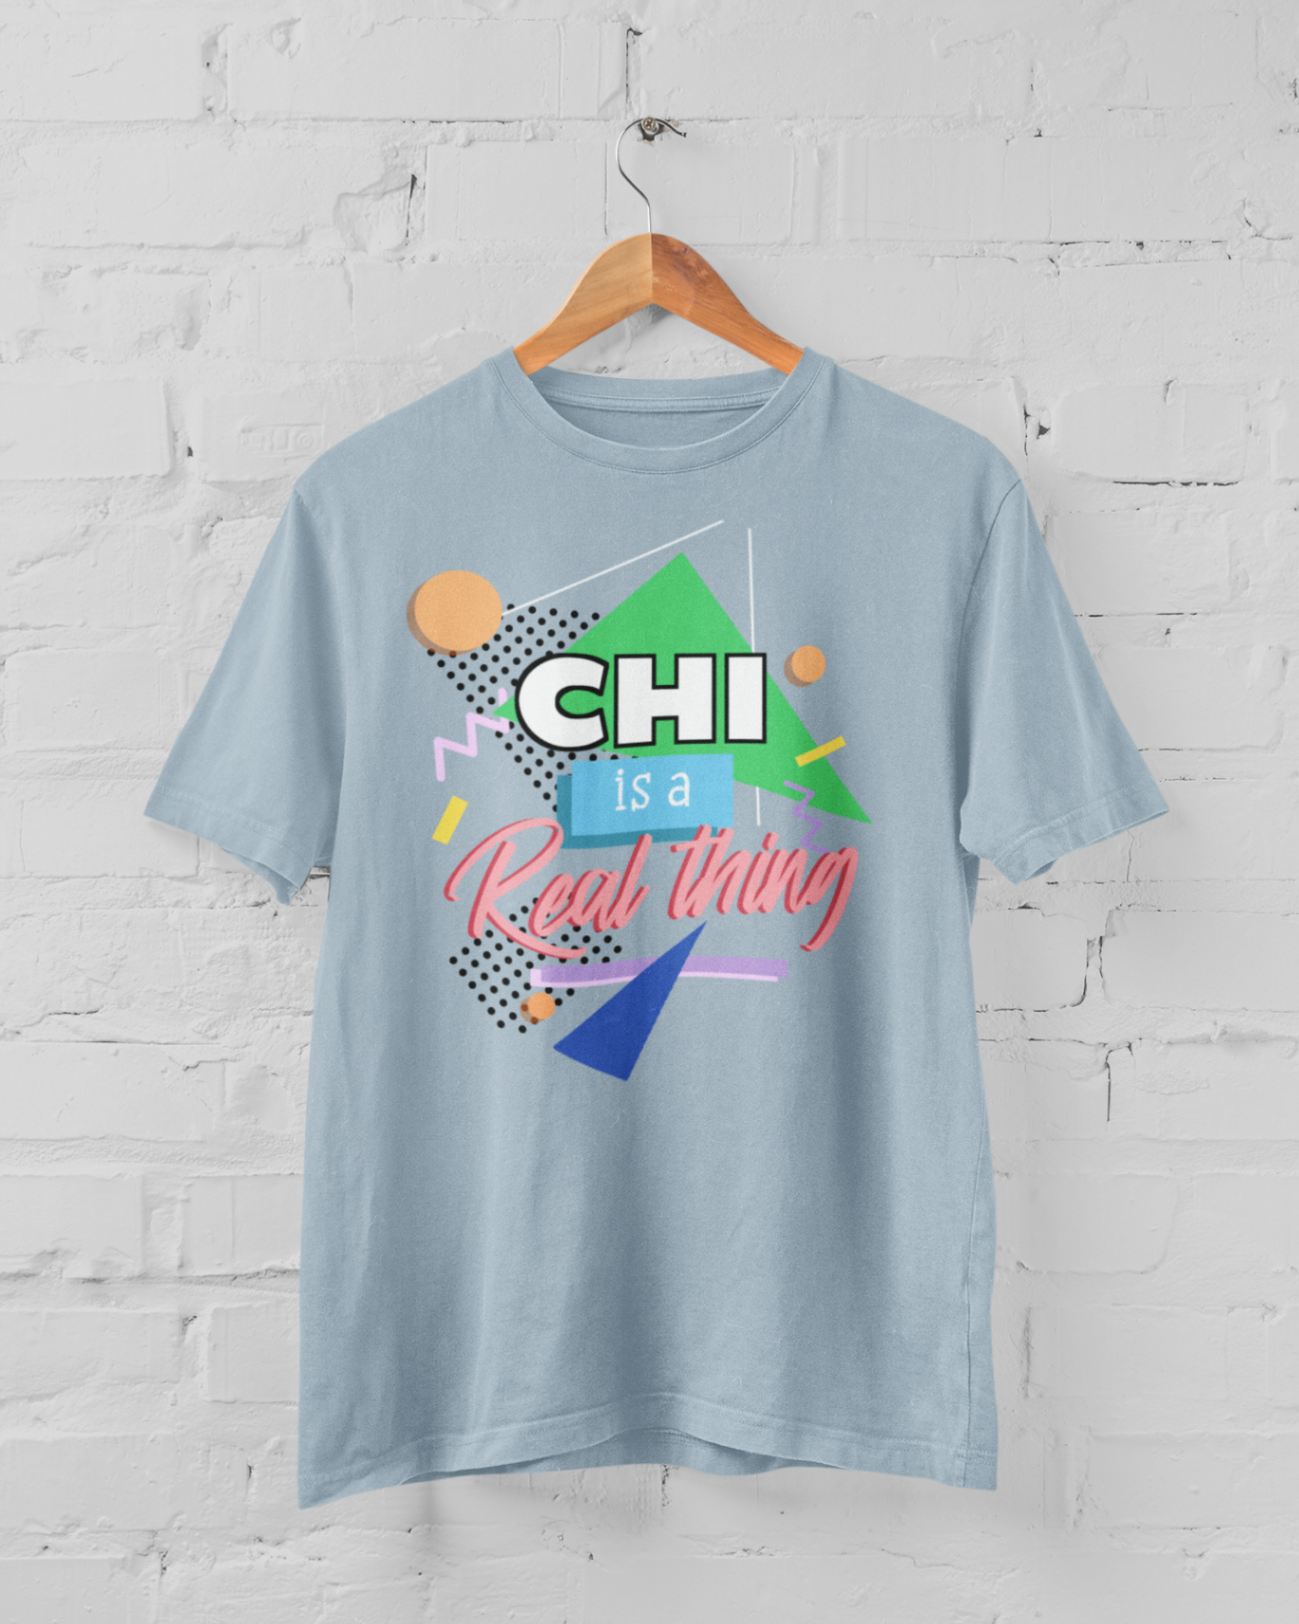  light blue t-shirt 'Chi is a real thing' design